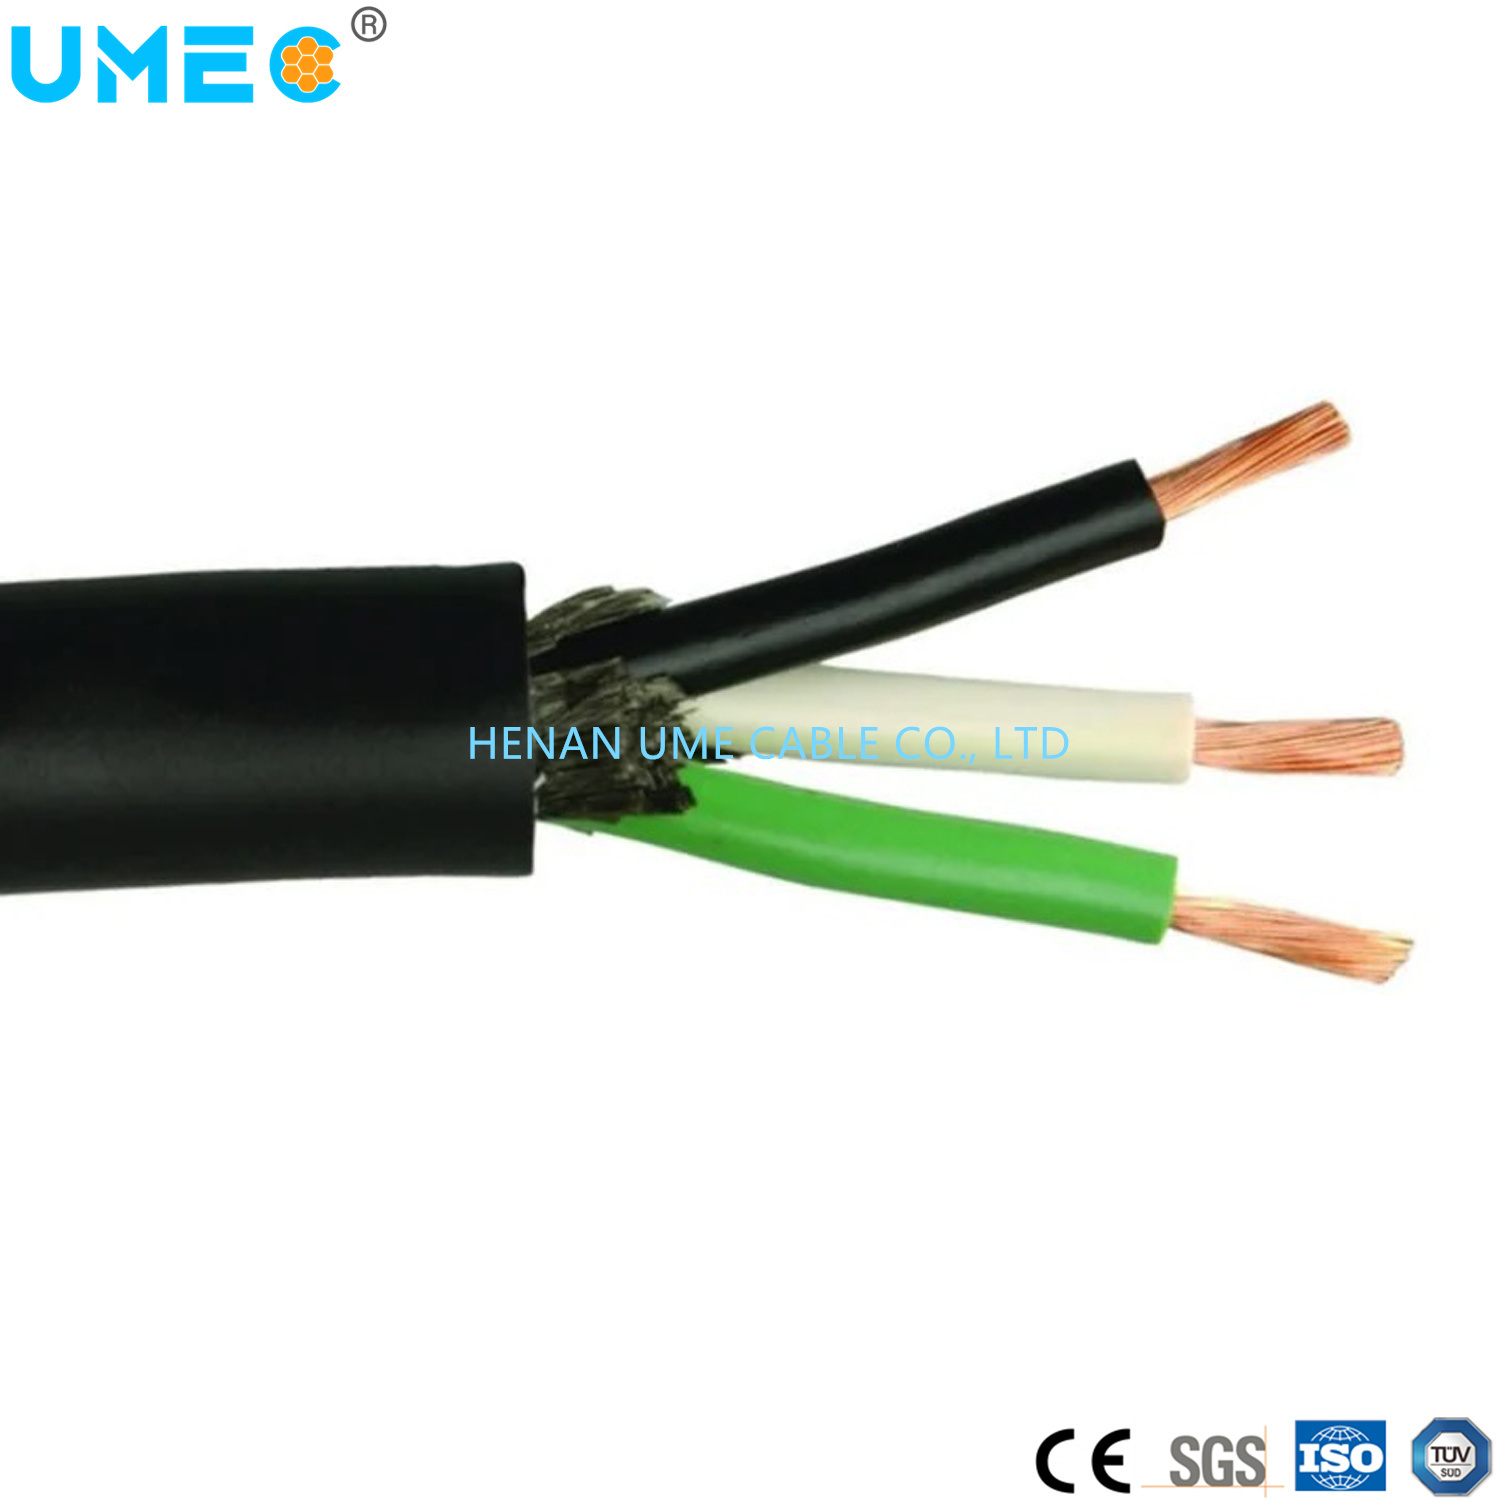 
                Rubber Filler Flexible CPE/Epr Cable 18/16/14/12 AWG 3 4 5 6 7core Sjoow Cable CPE Jacket Moisture Resistant Cable
            